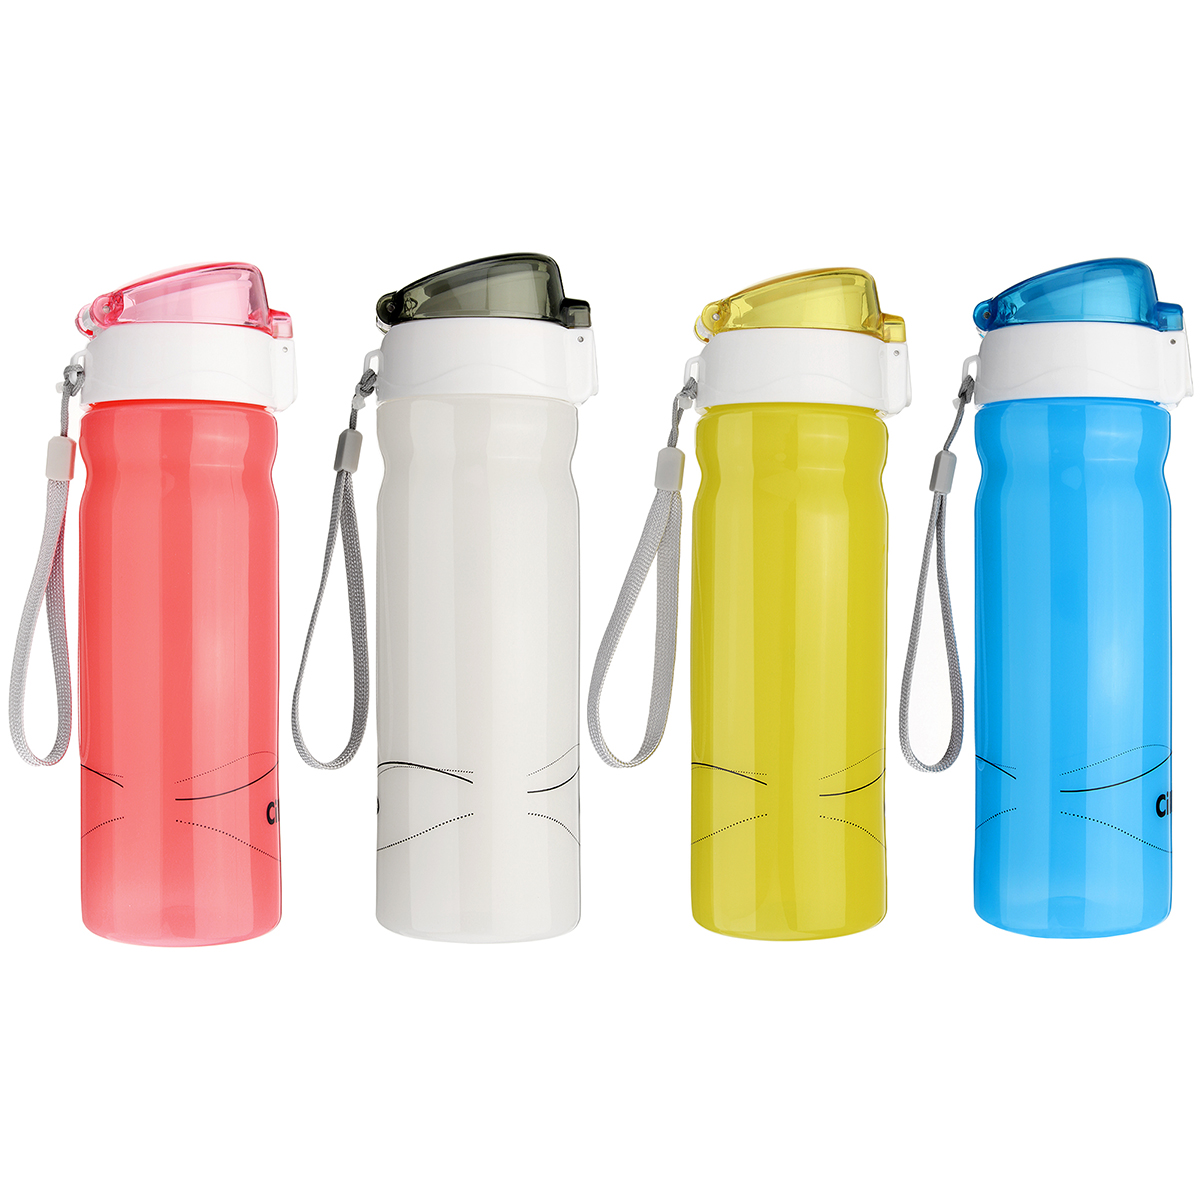 600ml20oz-High-quality-Food-Grade-Water-Bottle-for-long-hikes-trekking-hot-yoga-class-long-load-trip-1523049-1